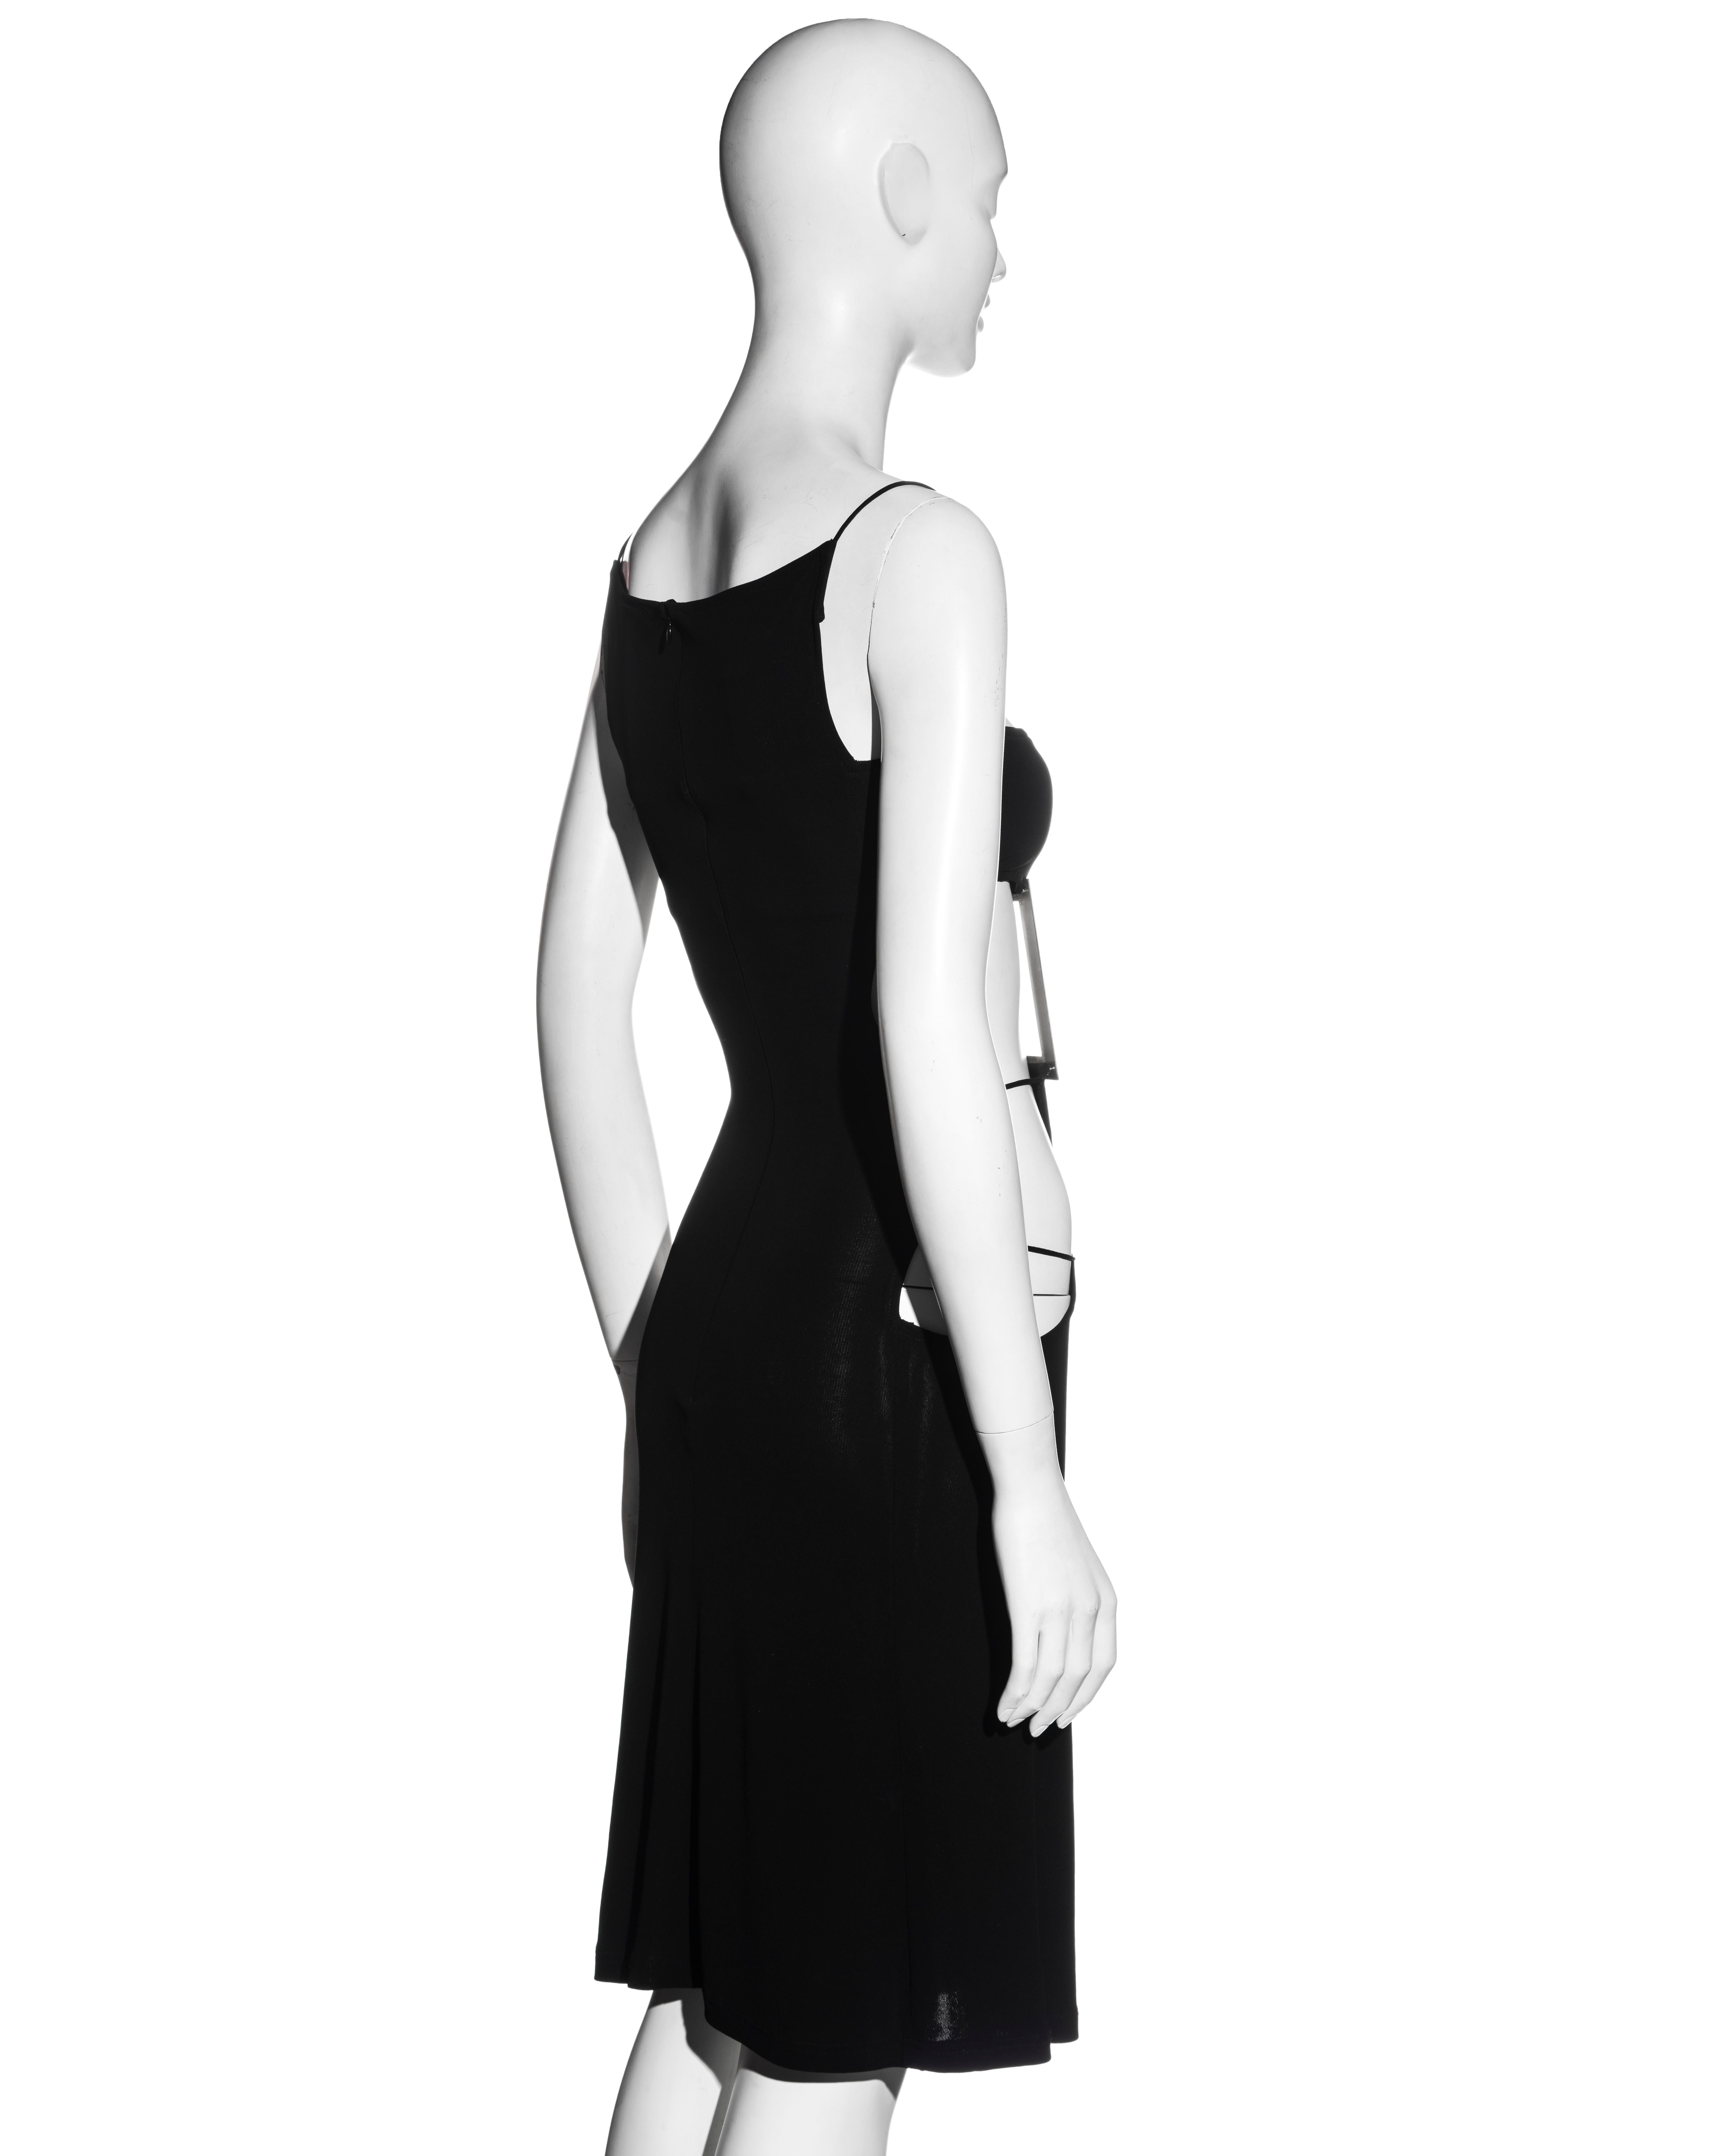 Women's Paco Rabanne black rayon strappy evening dress with square mirror plate, ss 2004